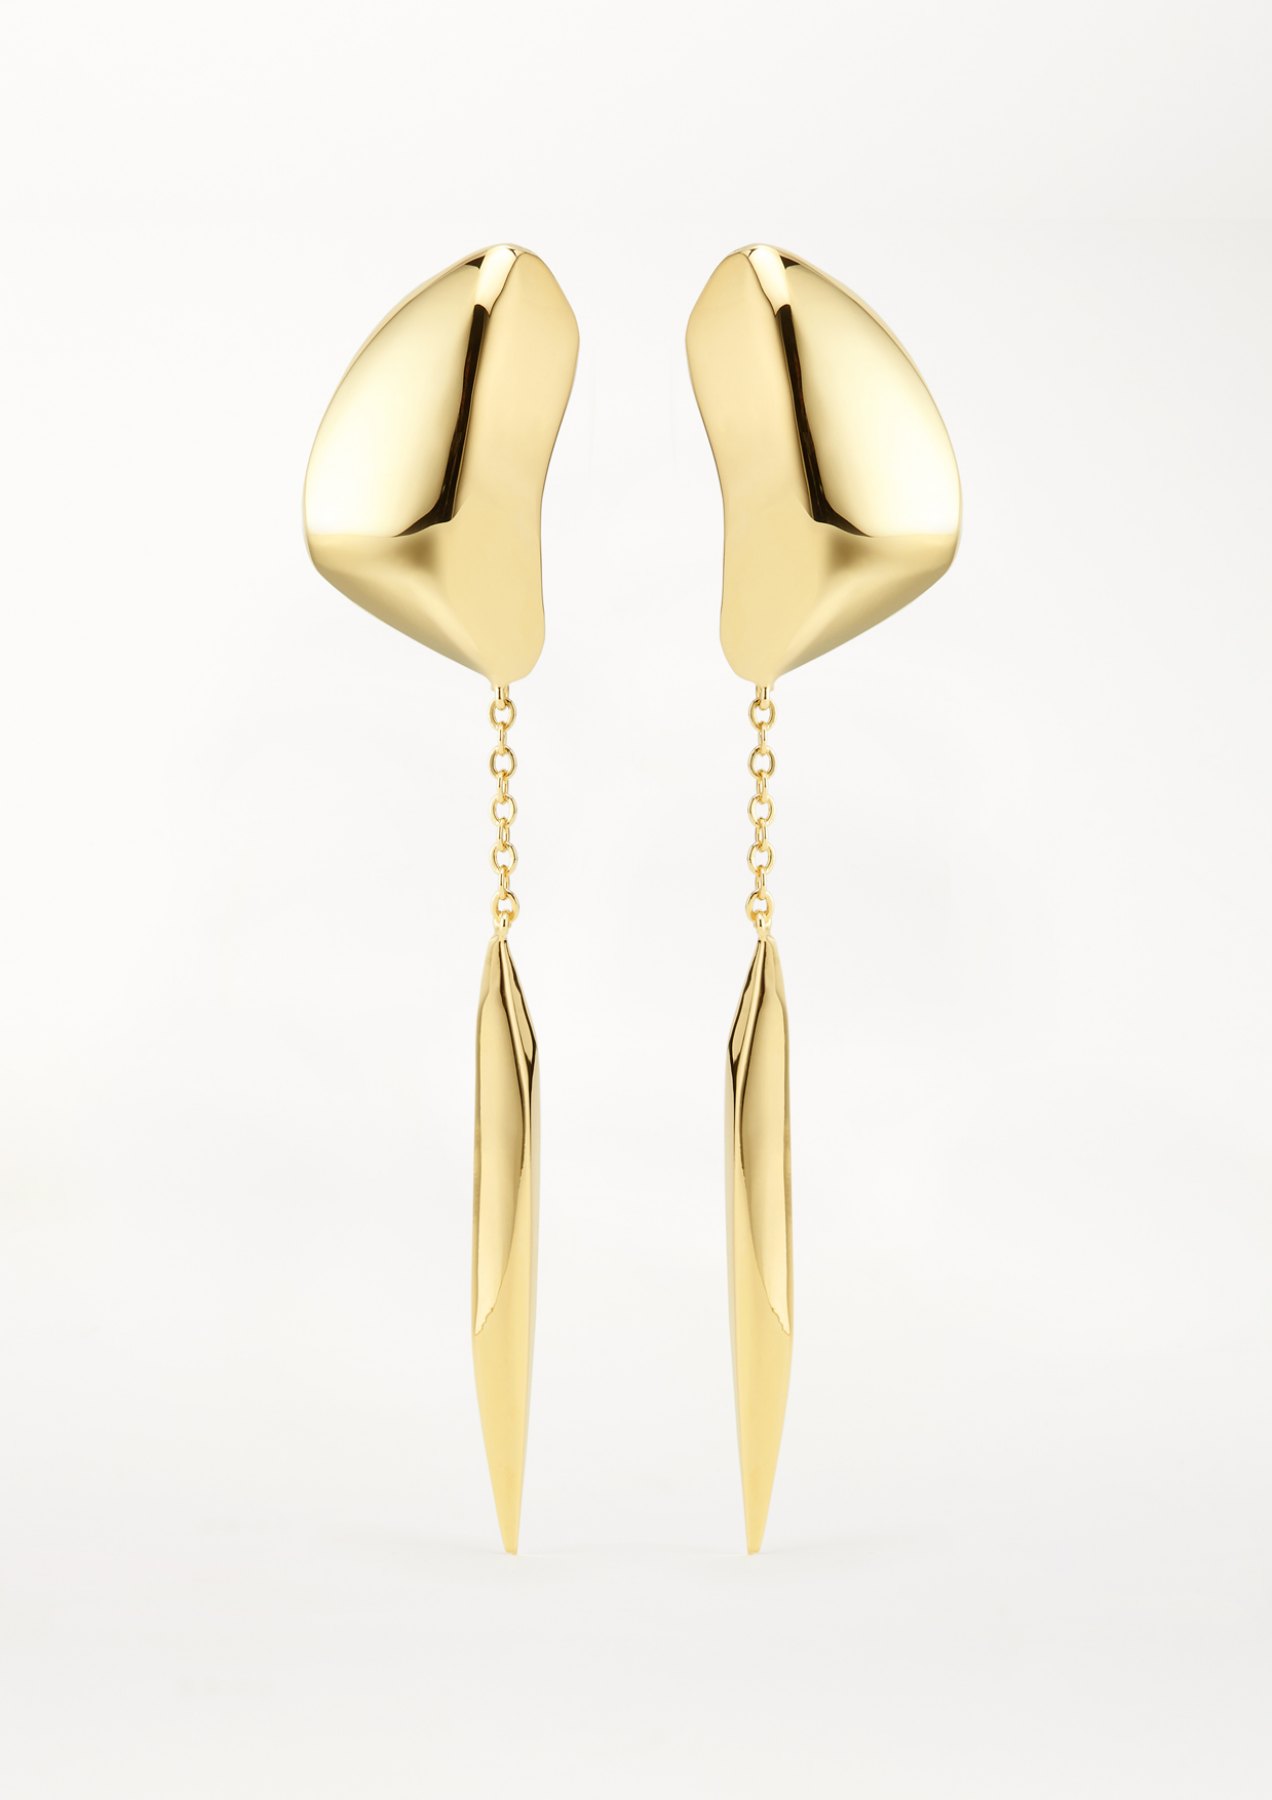 statement earrings with long chain pendant in clean sculptural design in gold